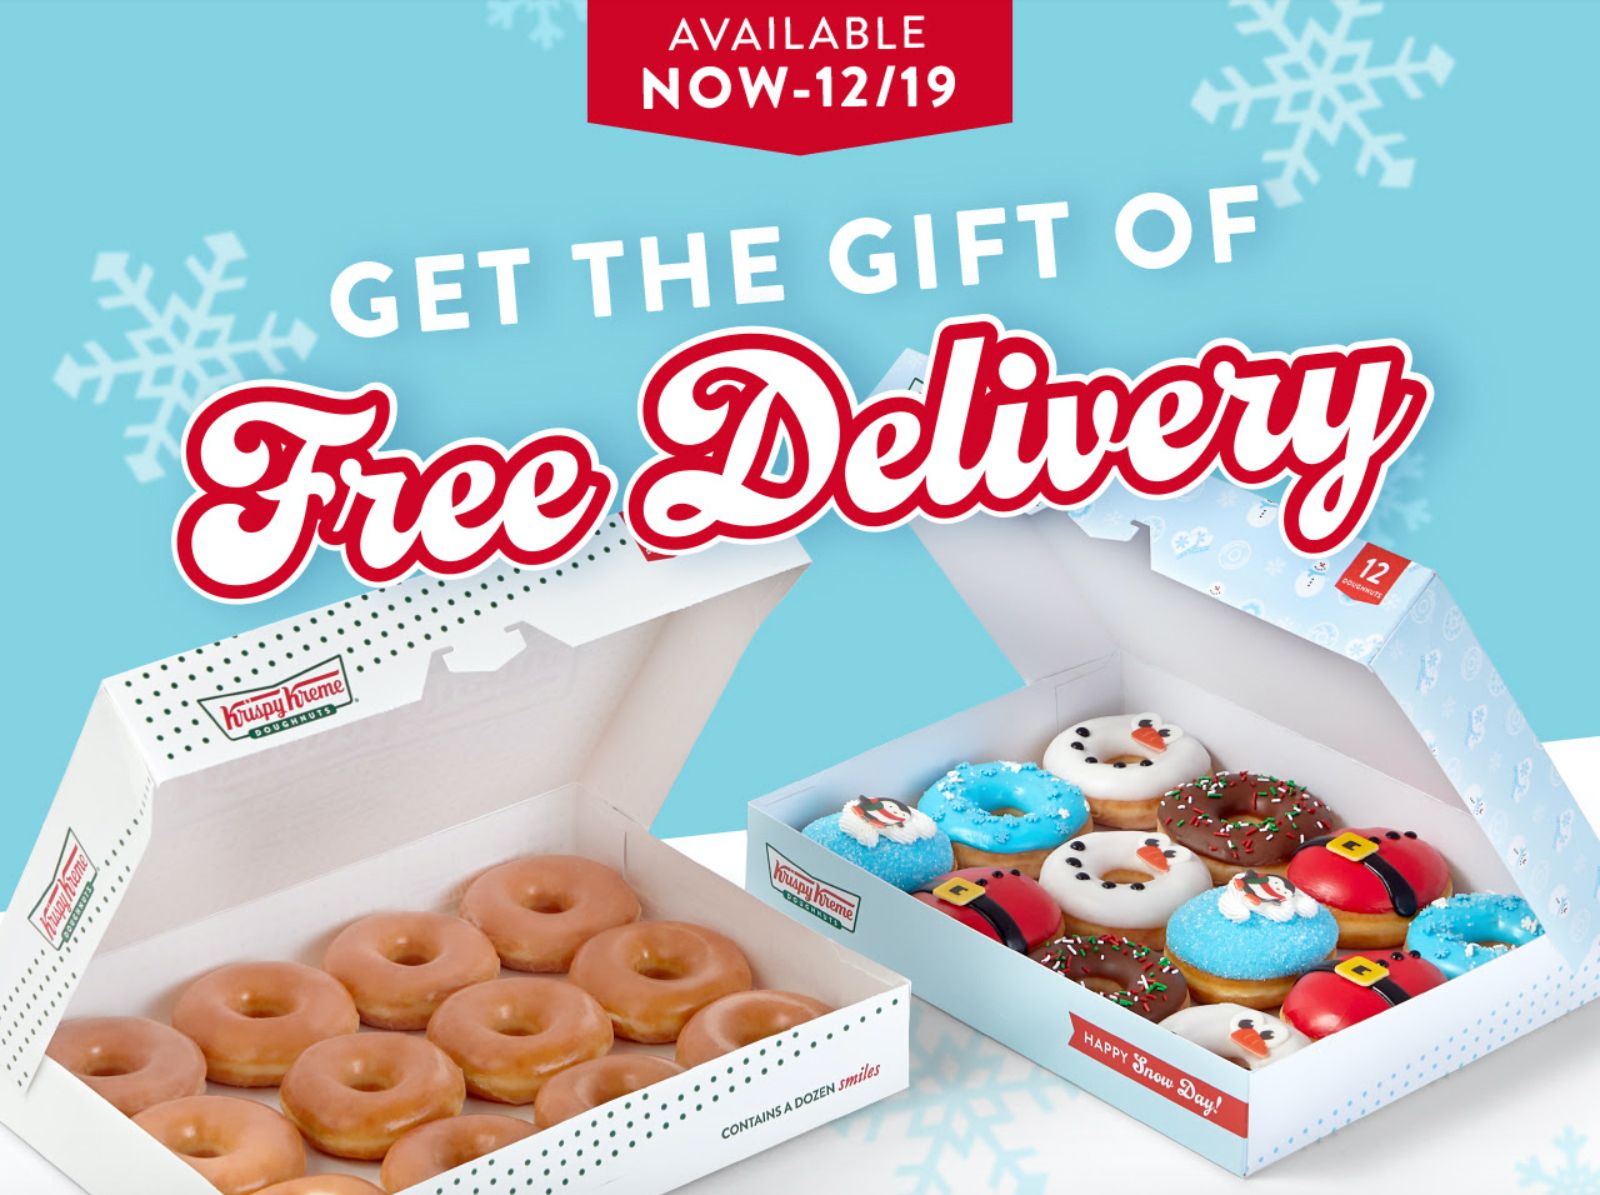 Krispy Kreme Offers Free Delivery Through to December 19 for the Holidays 